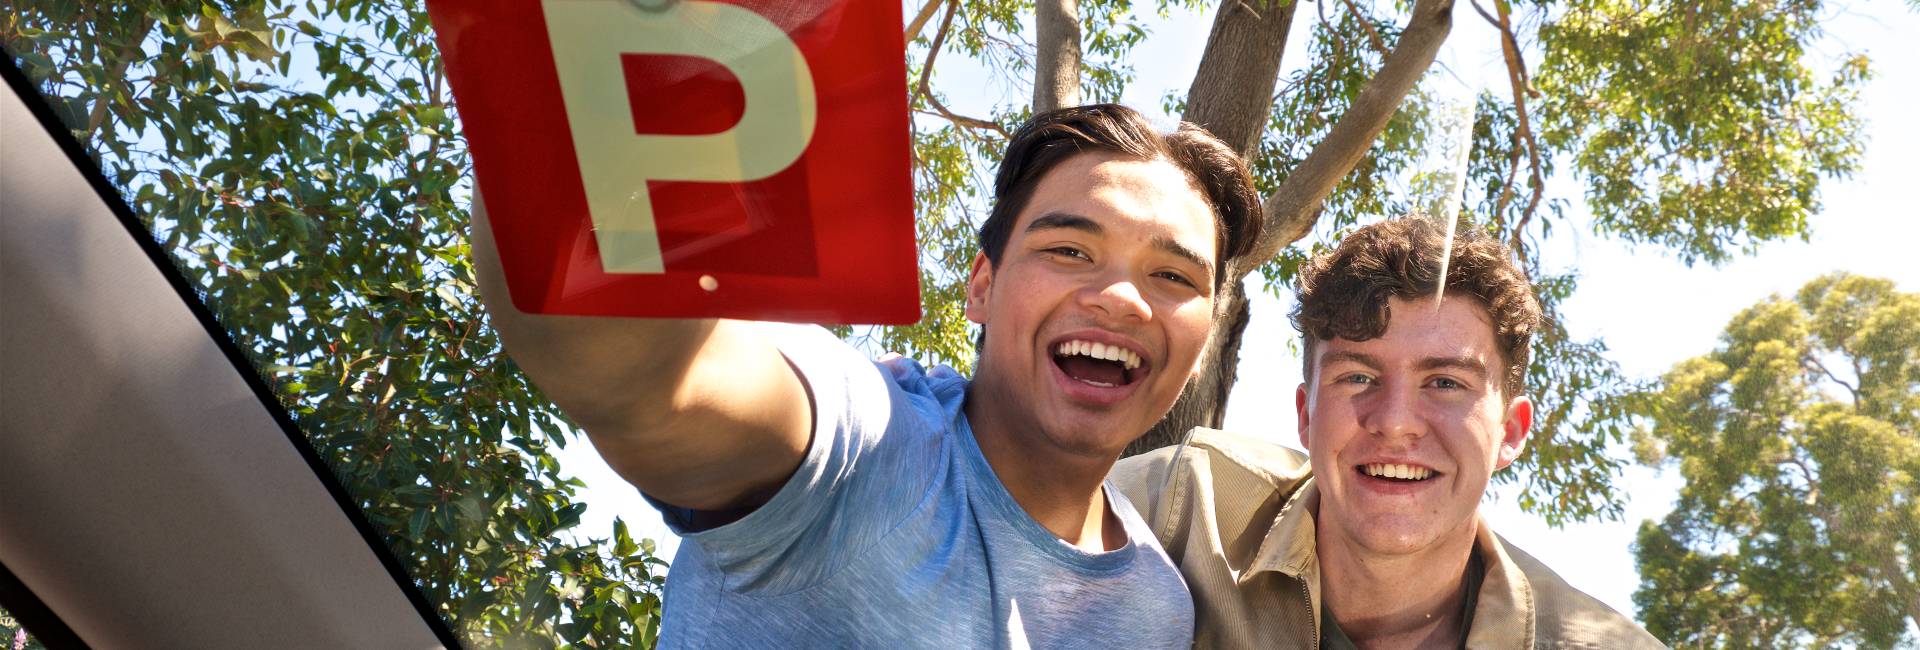 Teens with p-plates